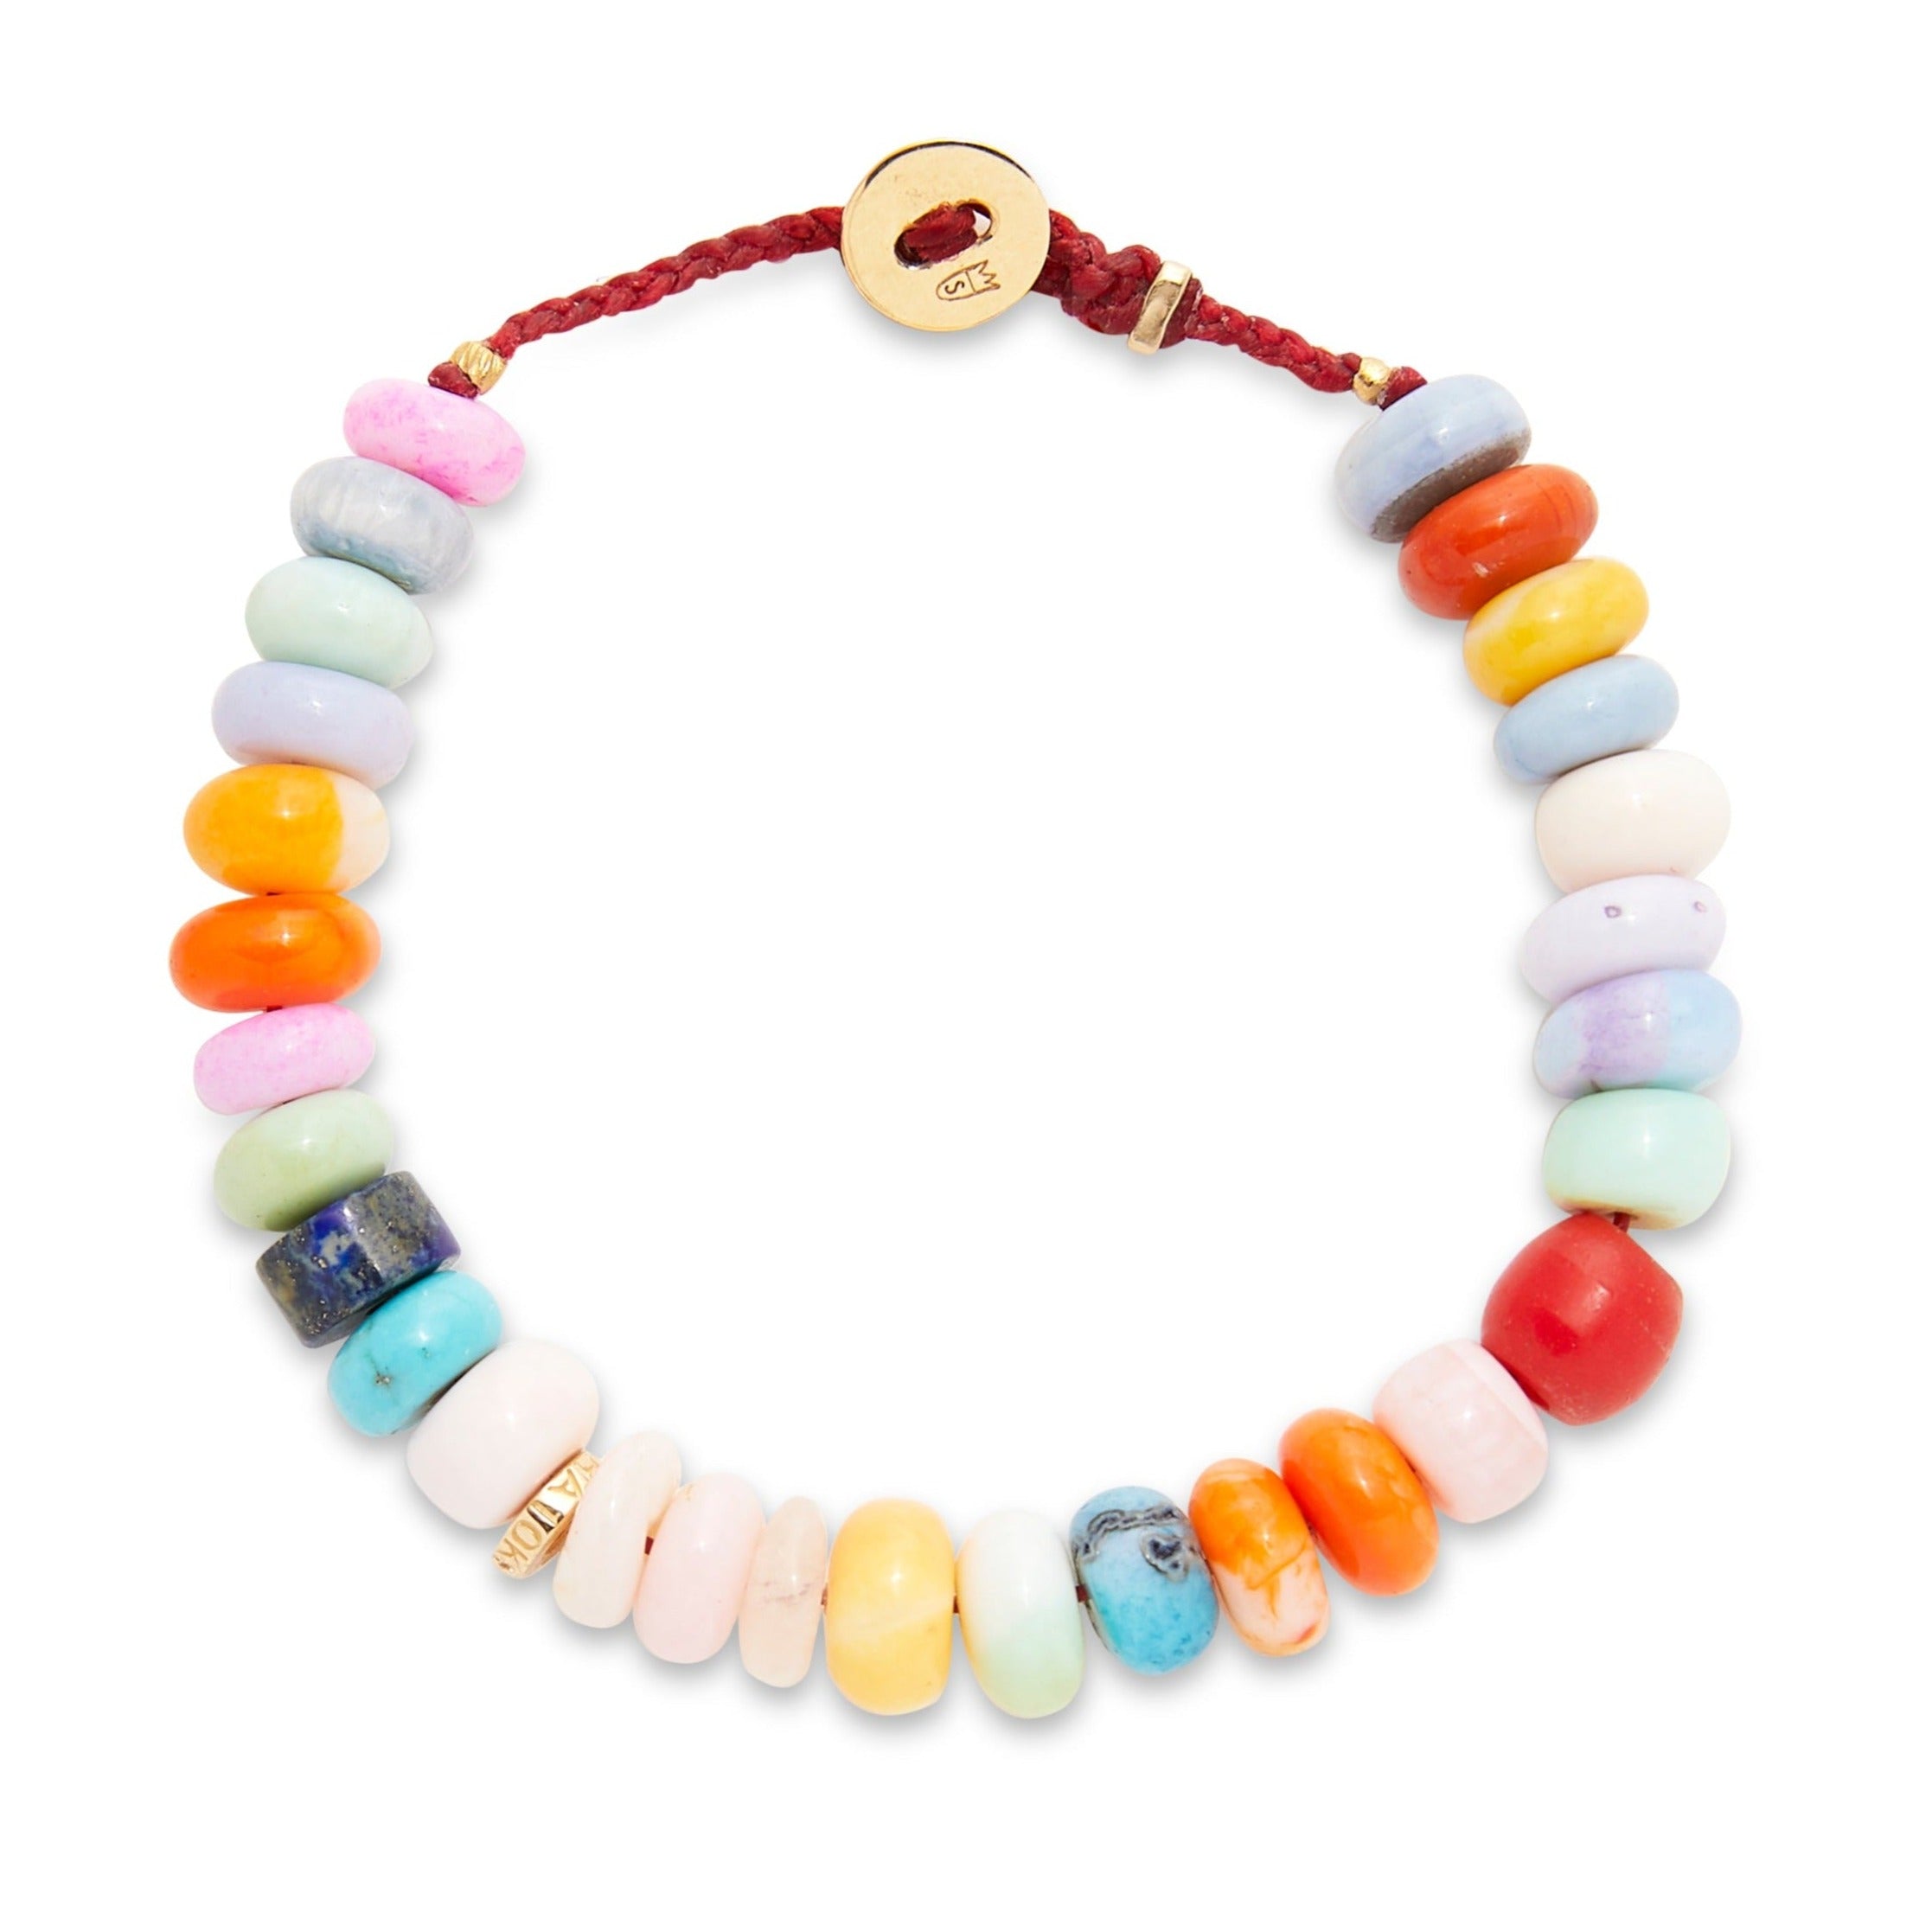 Candy Jewelry - Primary Colors Corp